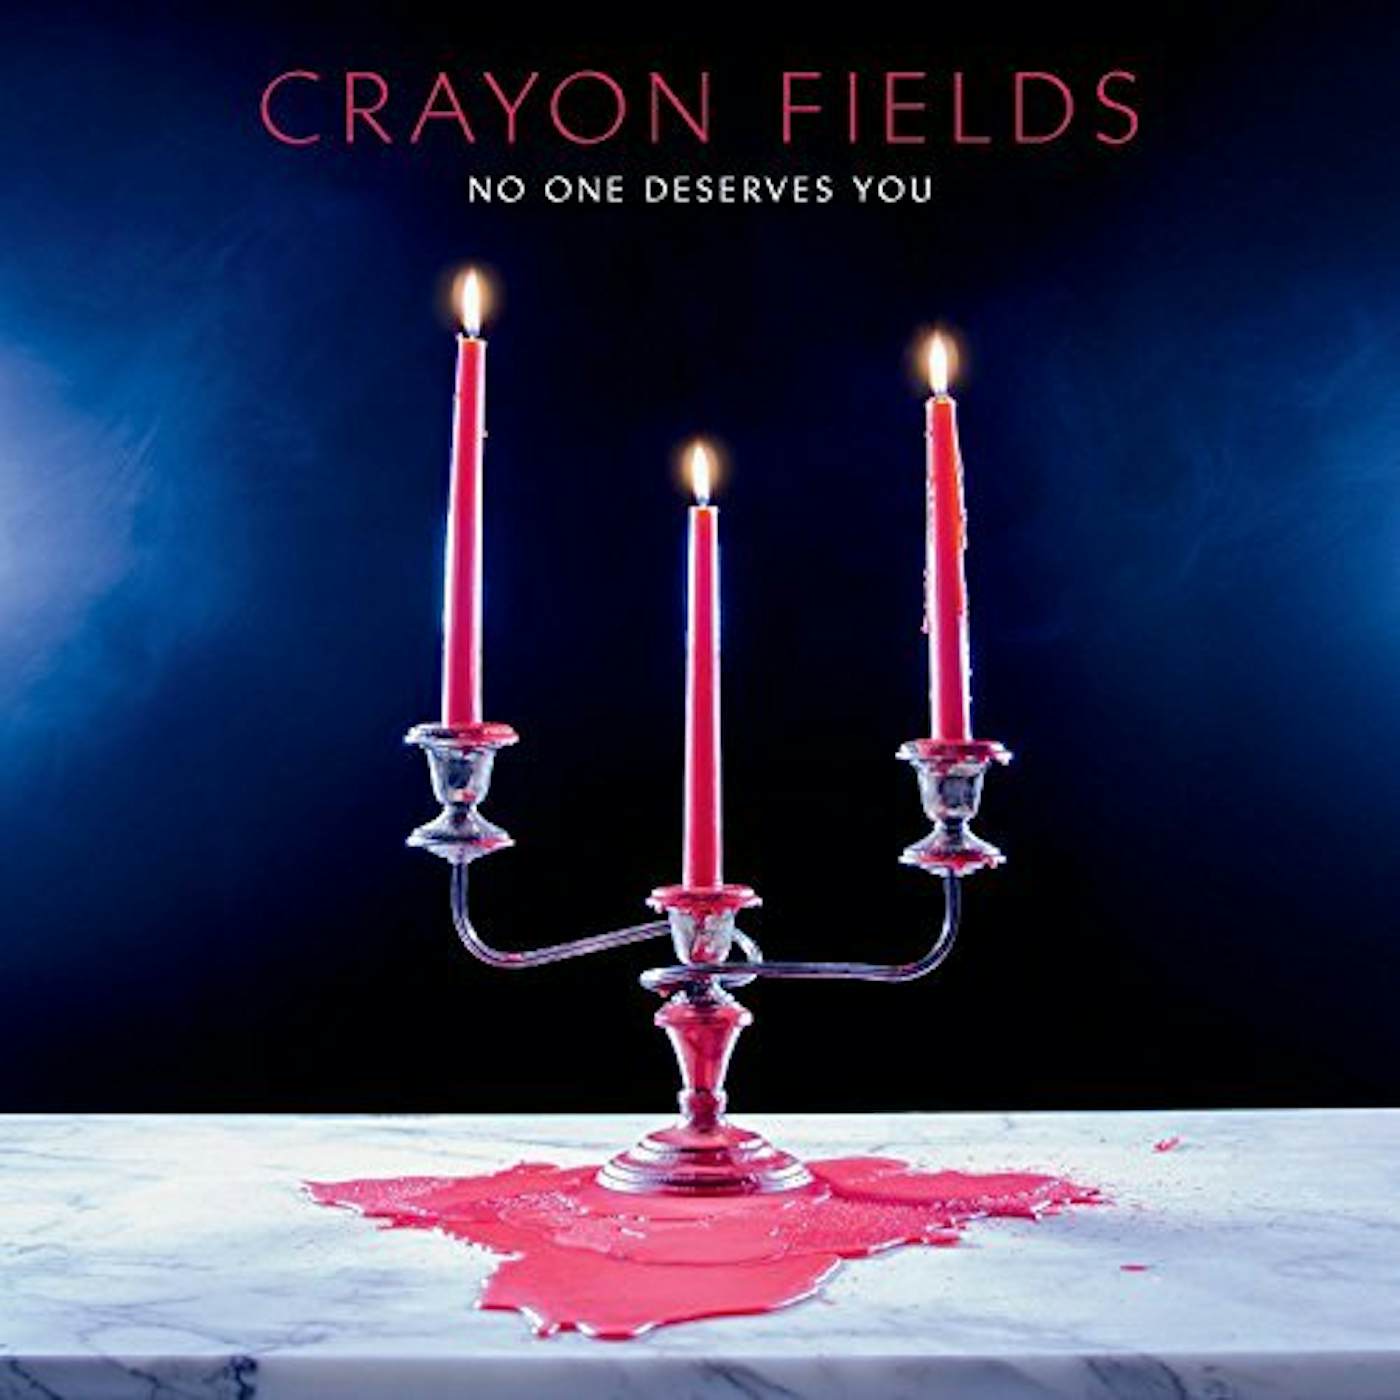 The Crayon Fields NO ONE DESERVES YOU CD